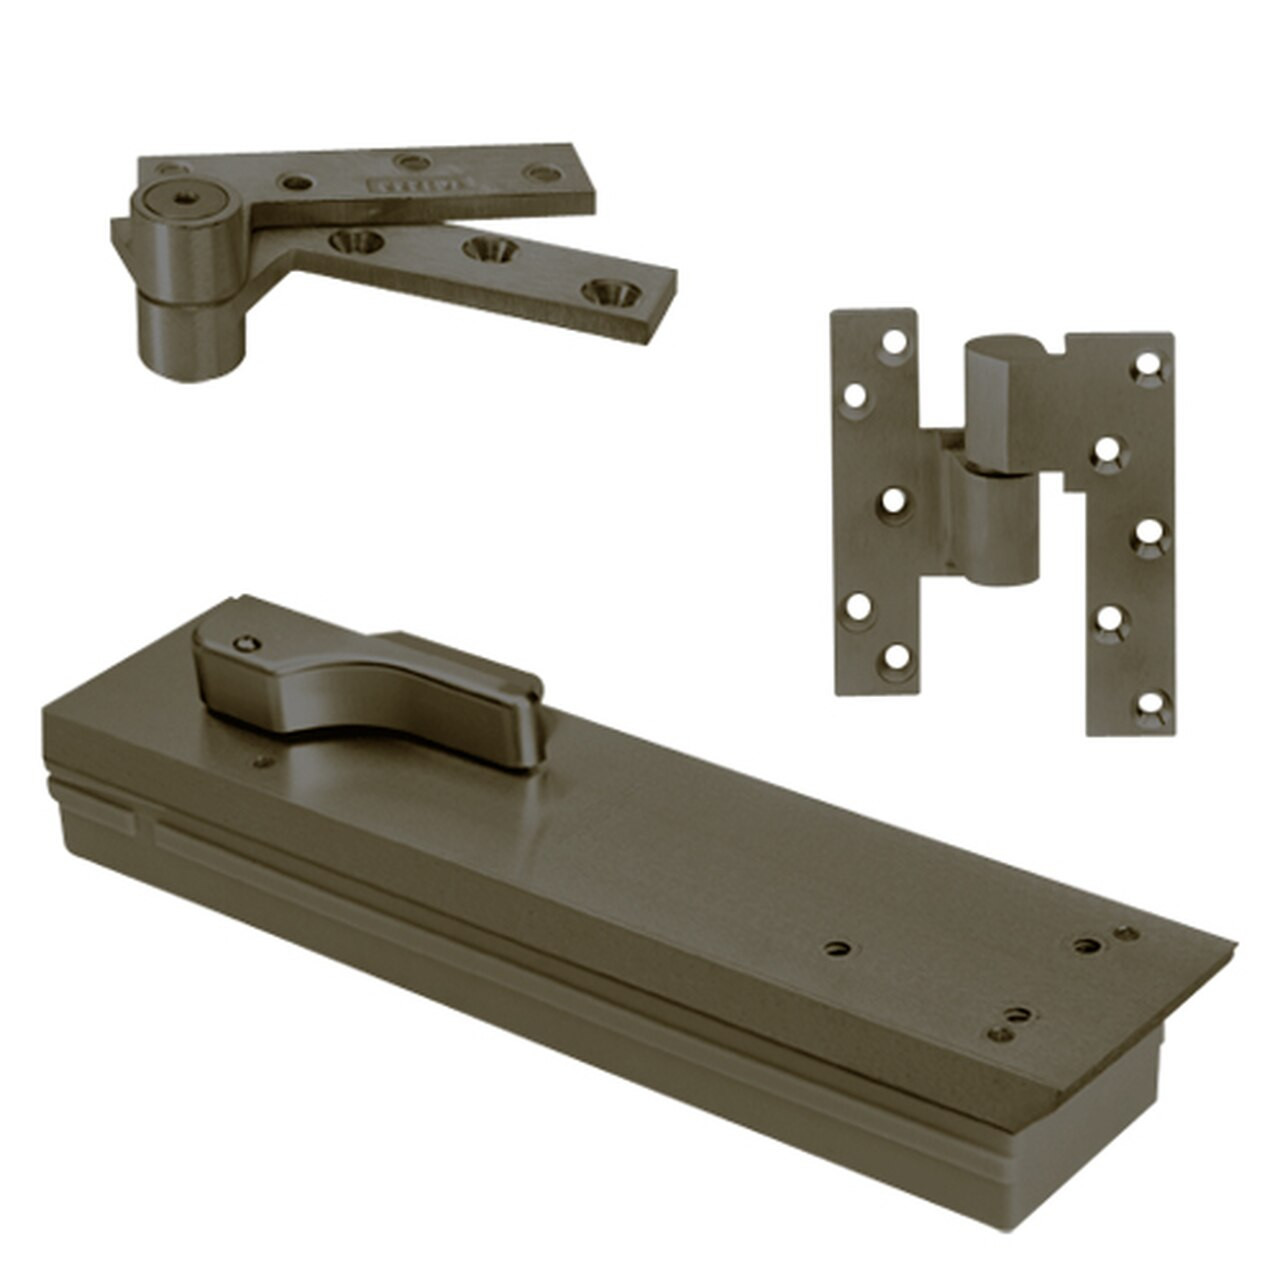 FQ5105NBC-LCC-LH-613 Rixson Q51 Series Fire Rated 3/4" Offset Hung Shallow Depth Floor Closers in Dark Bronze Finish